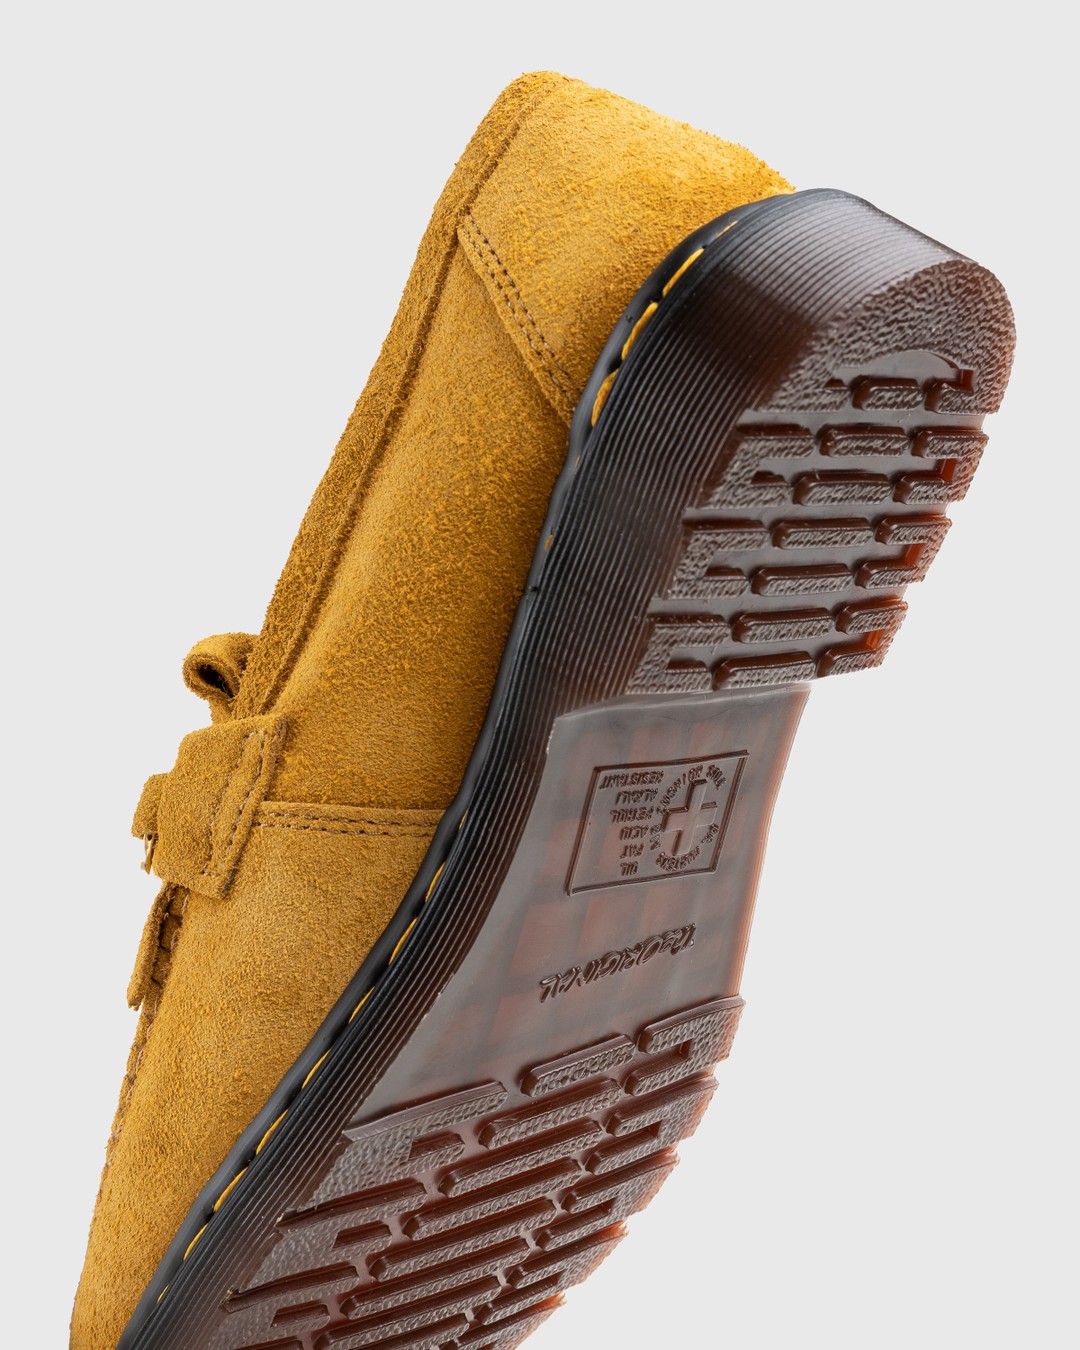 Dr. Martens – Adrian Snaffle Suede Loafers Light Tan Desert Oasis Suede (Gum Oil) - Shoes - Brown - Image 6